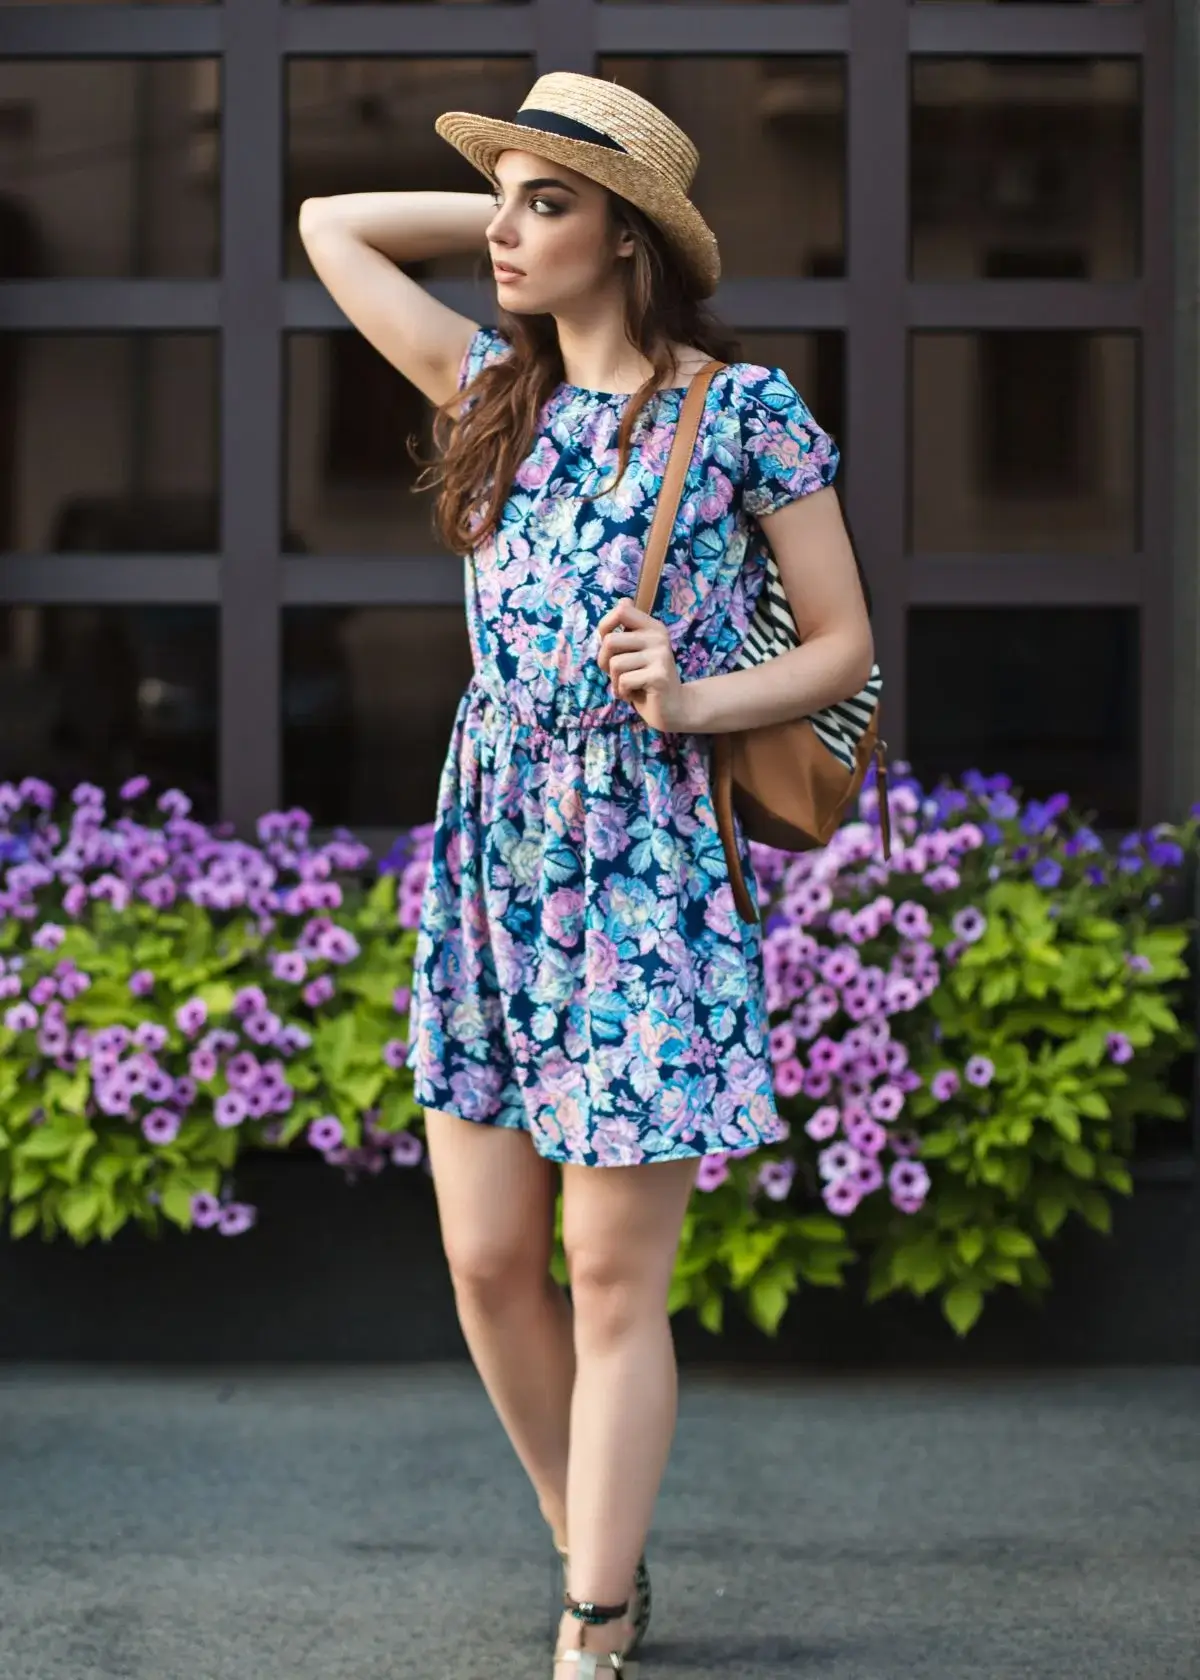 Are summer dresses suitable for formal events?